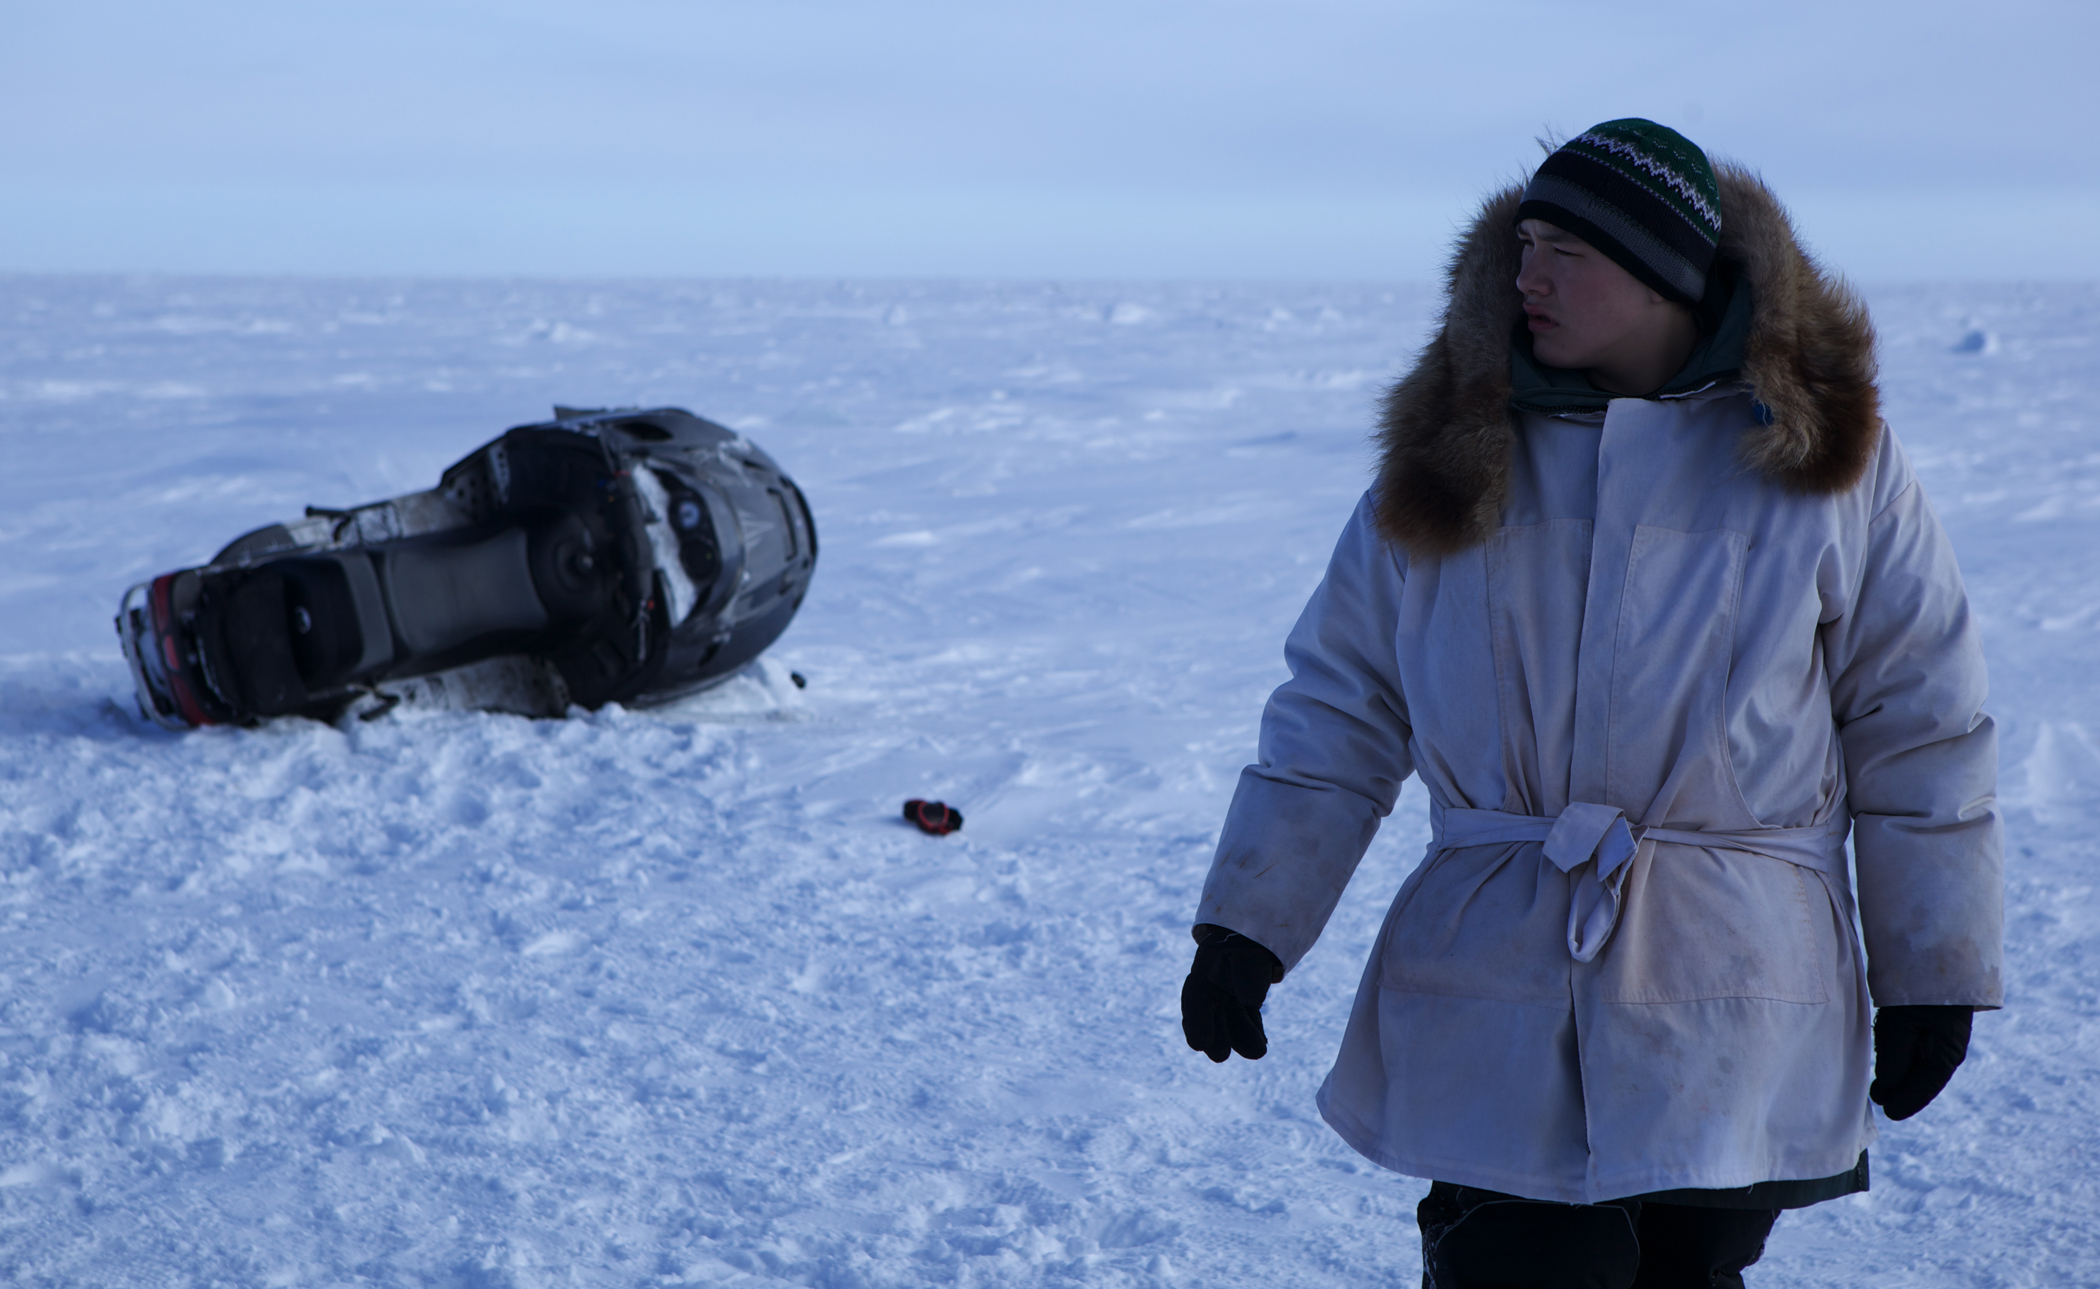 FUTURES: 'On the Ice' Director Andrew Okpeaha MacLean Talks About ...